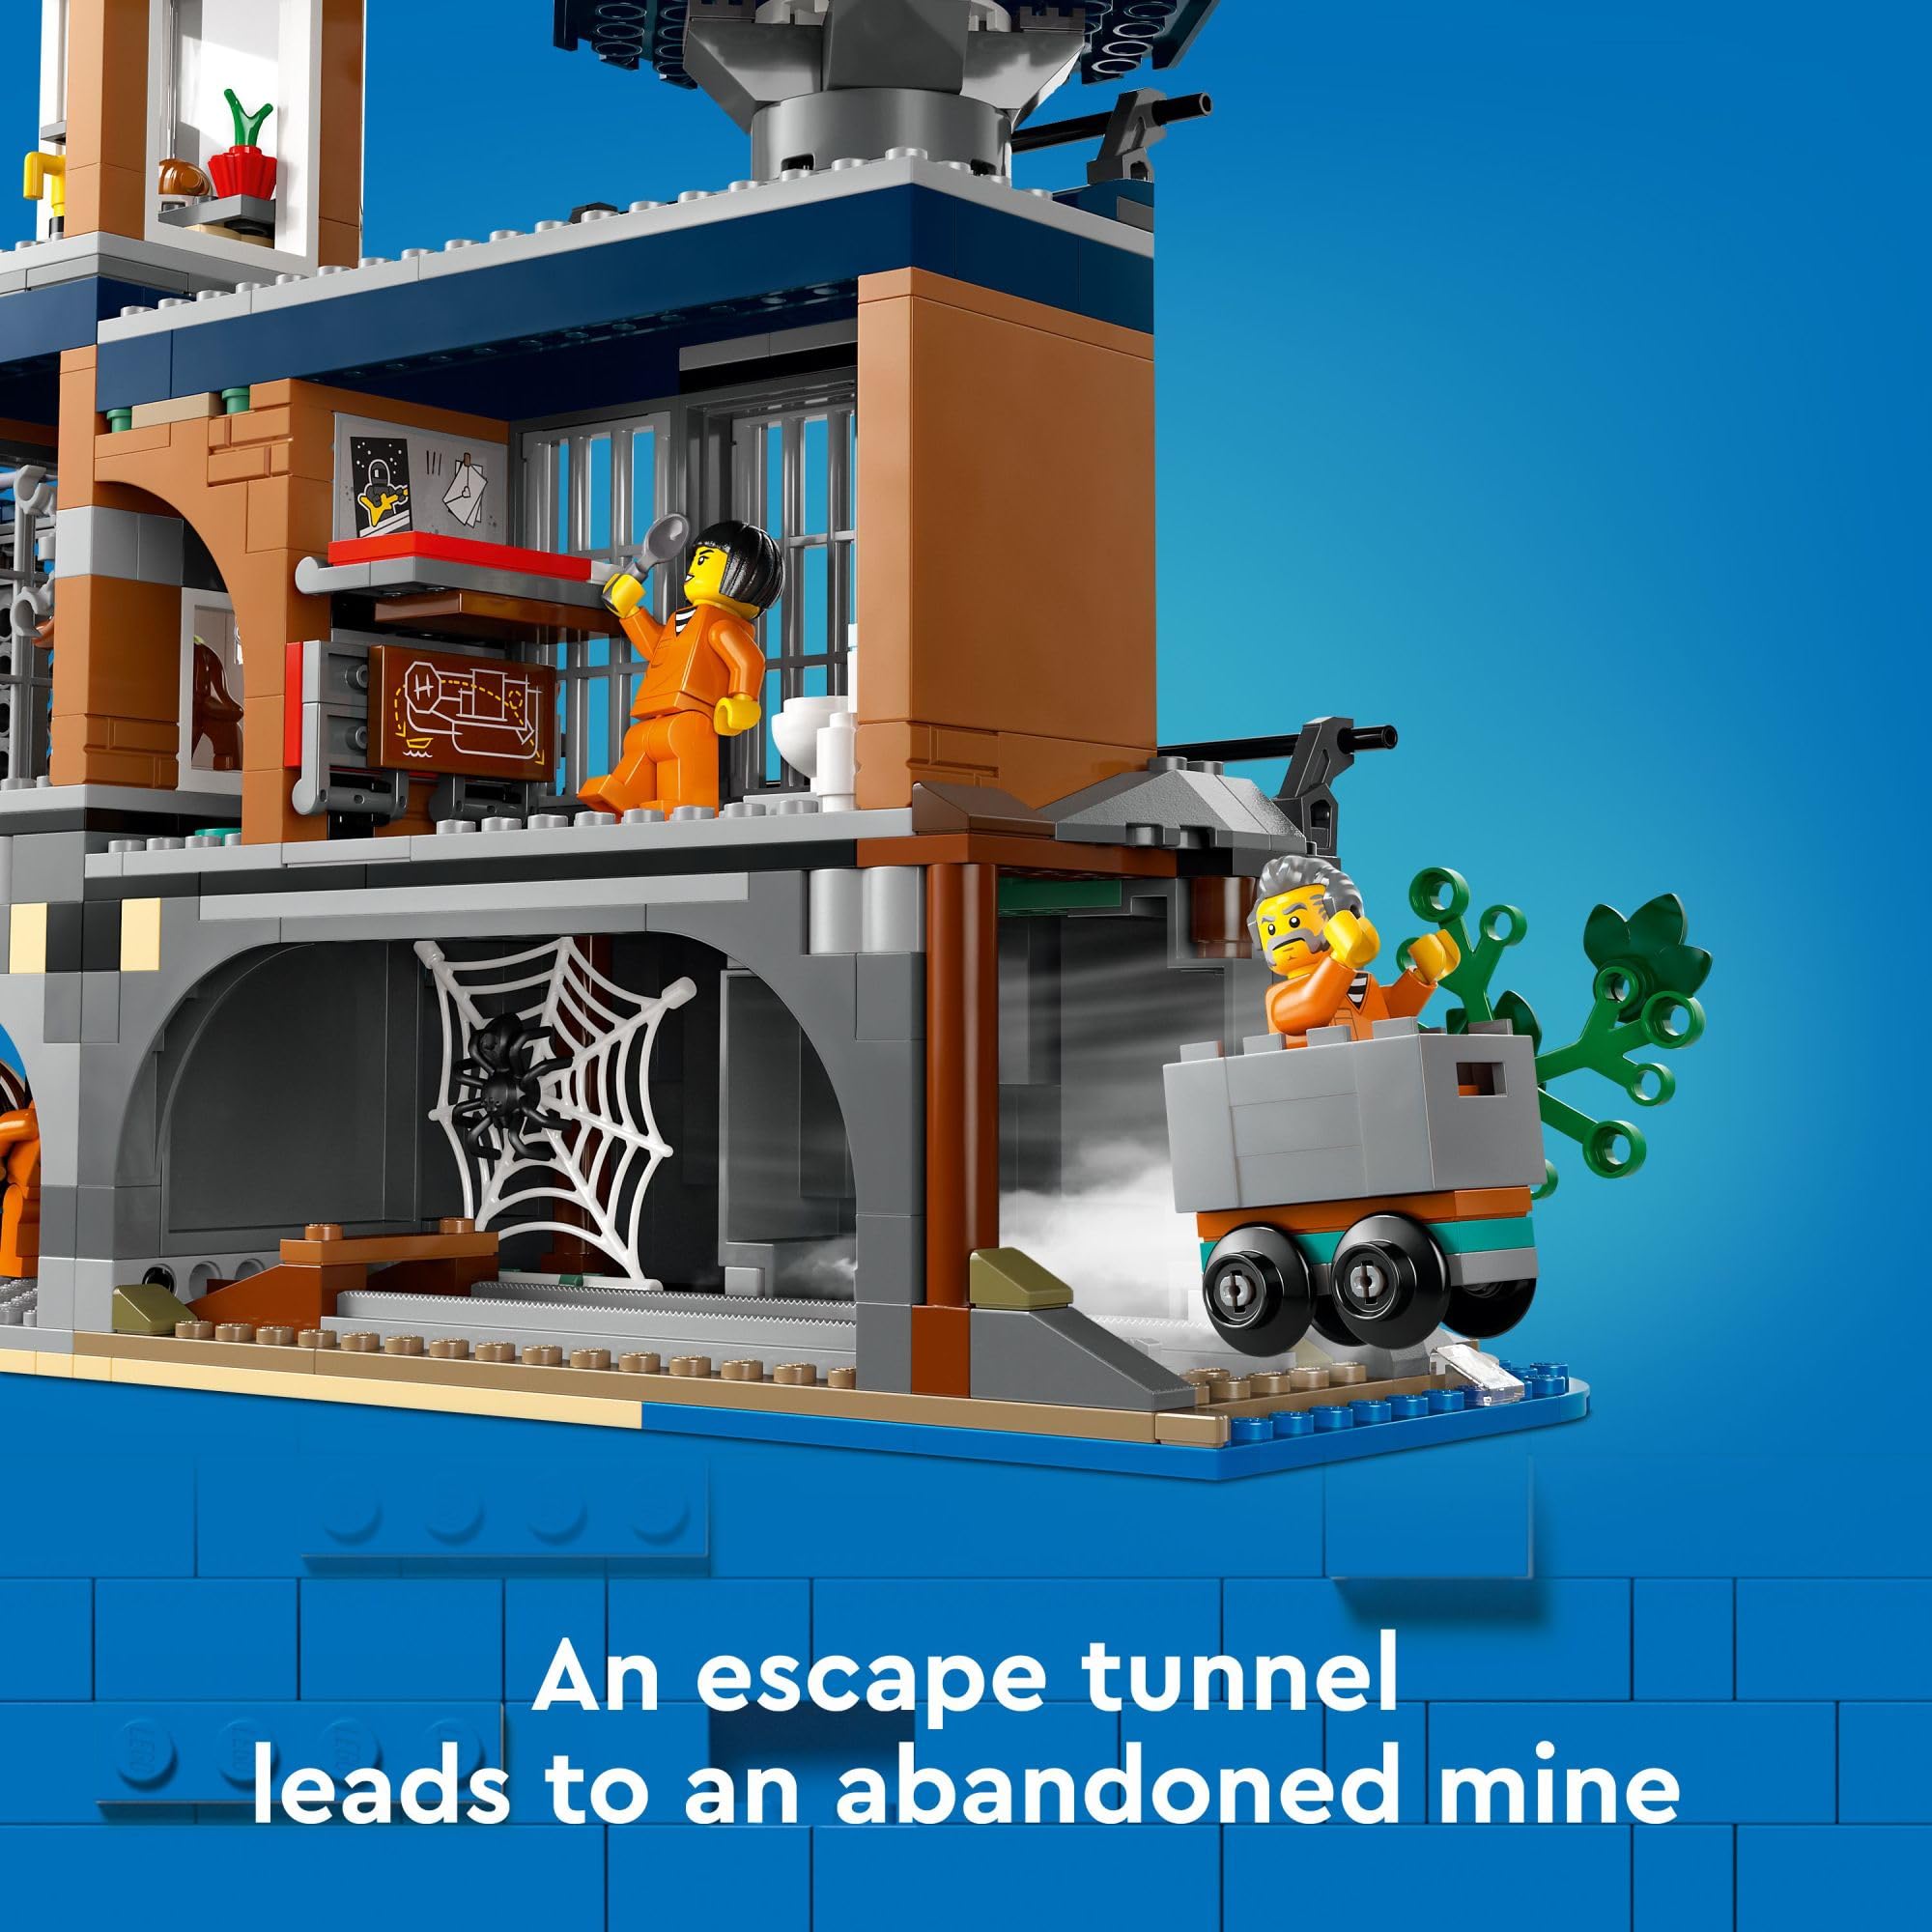 LEGO City Police Prison Island Toy Building Set, Birthday Gift for Boys and Girls Ages 7 Plus, Imaginative Play, Helicopter Toy, Boat Toy and Dinghy, 7 Minifigures with Dog and Shark Toy, 60419